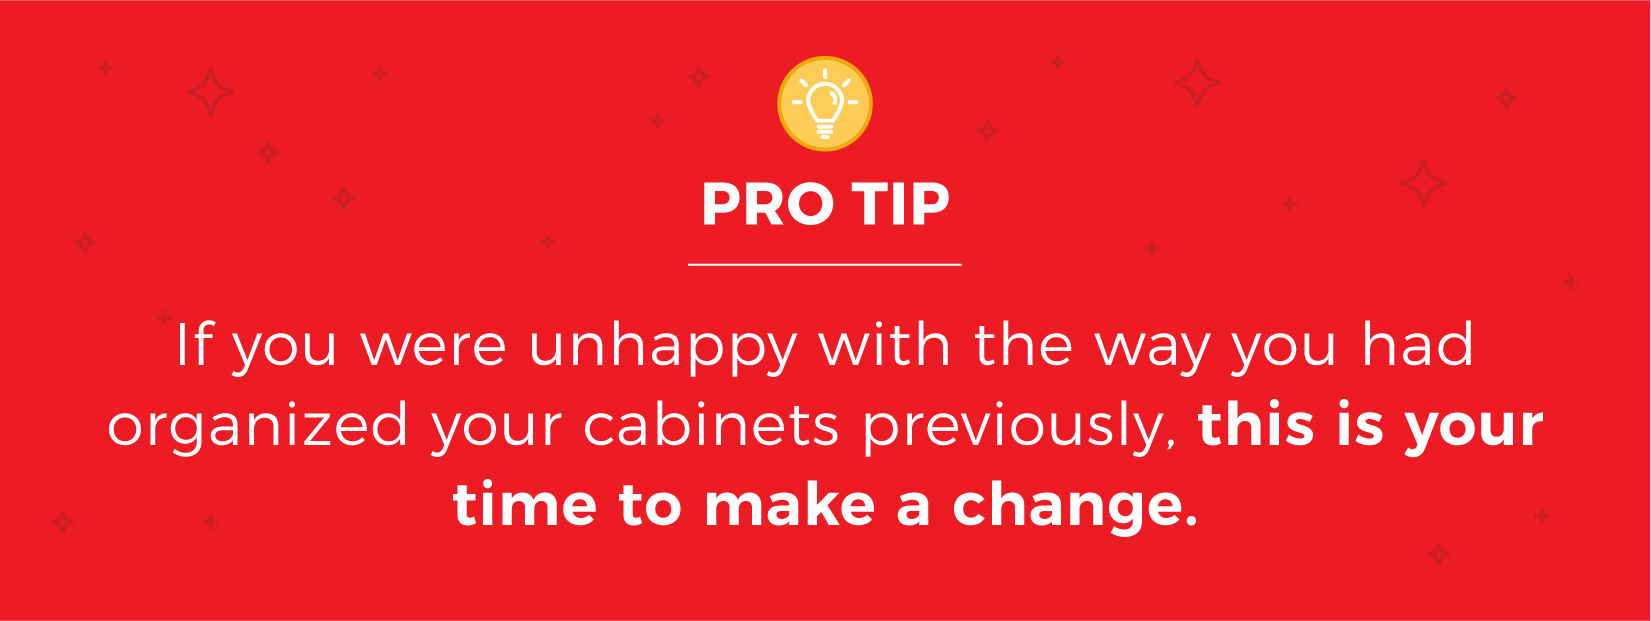 Image text reads: if you were unhappy with the way you had organized your cabinets previously, this is your time to make a change.